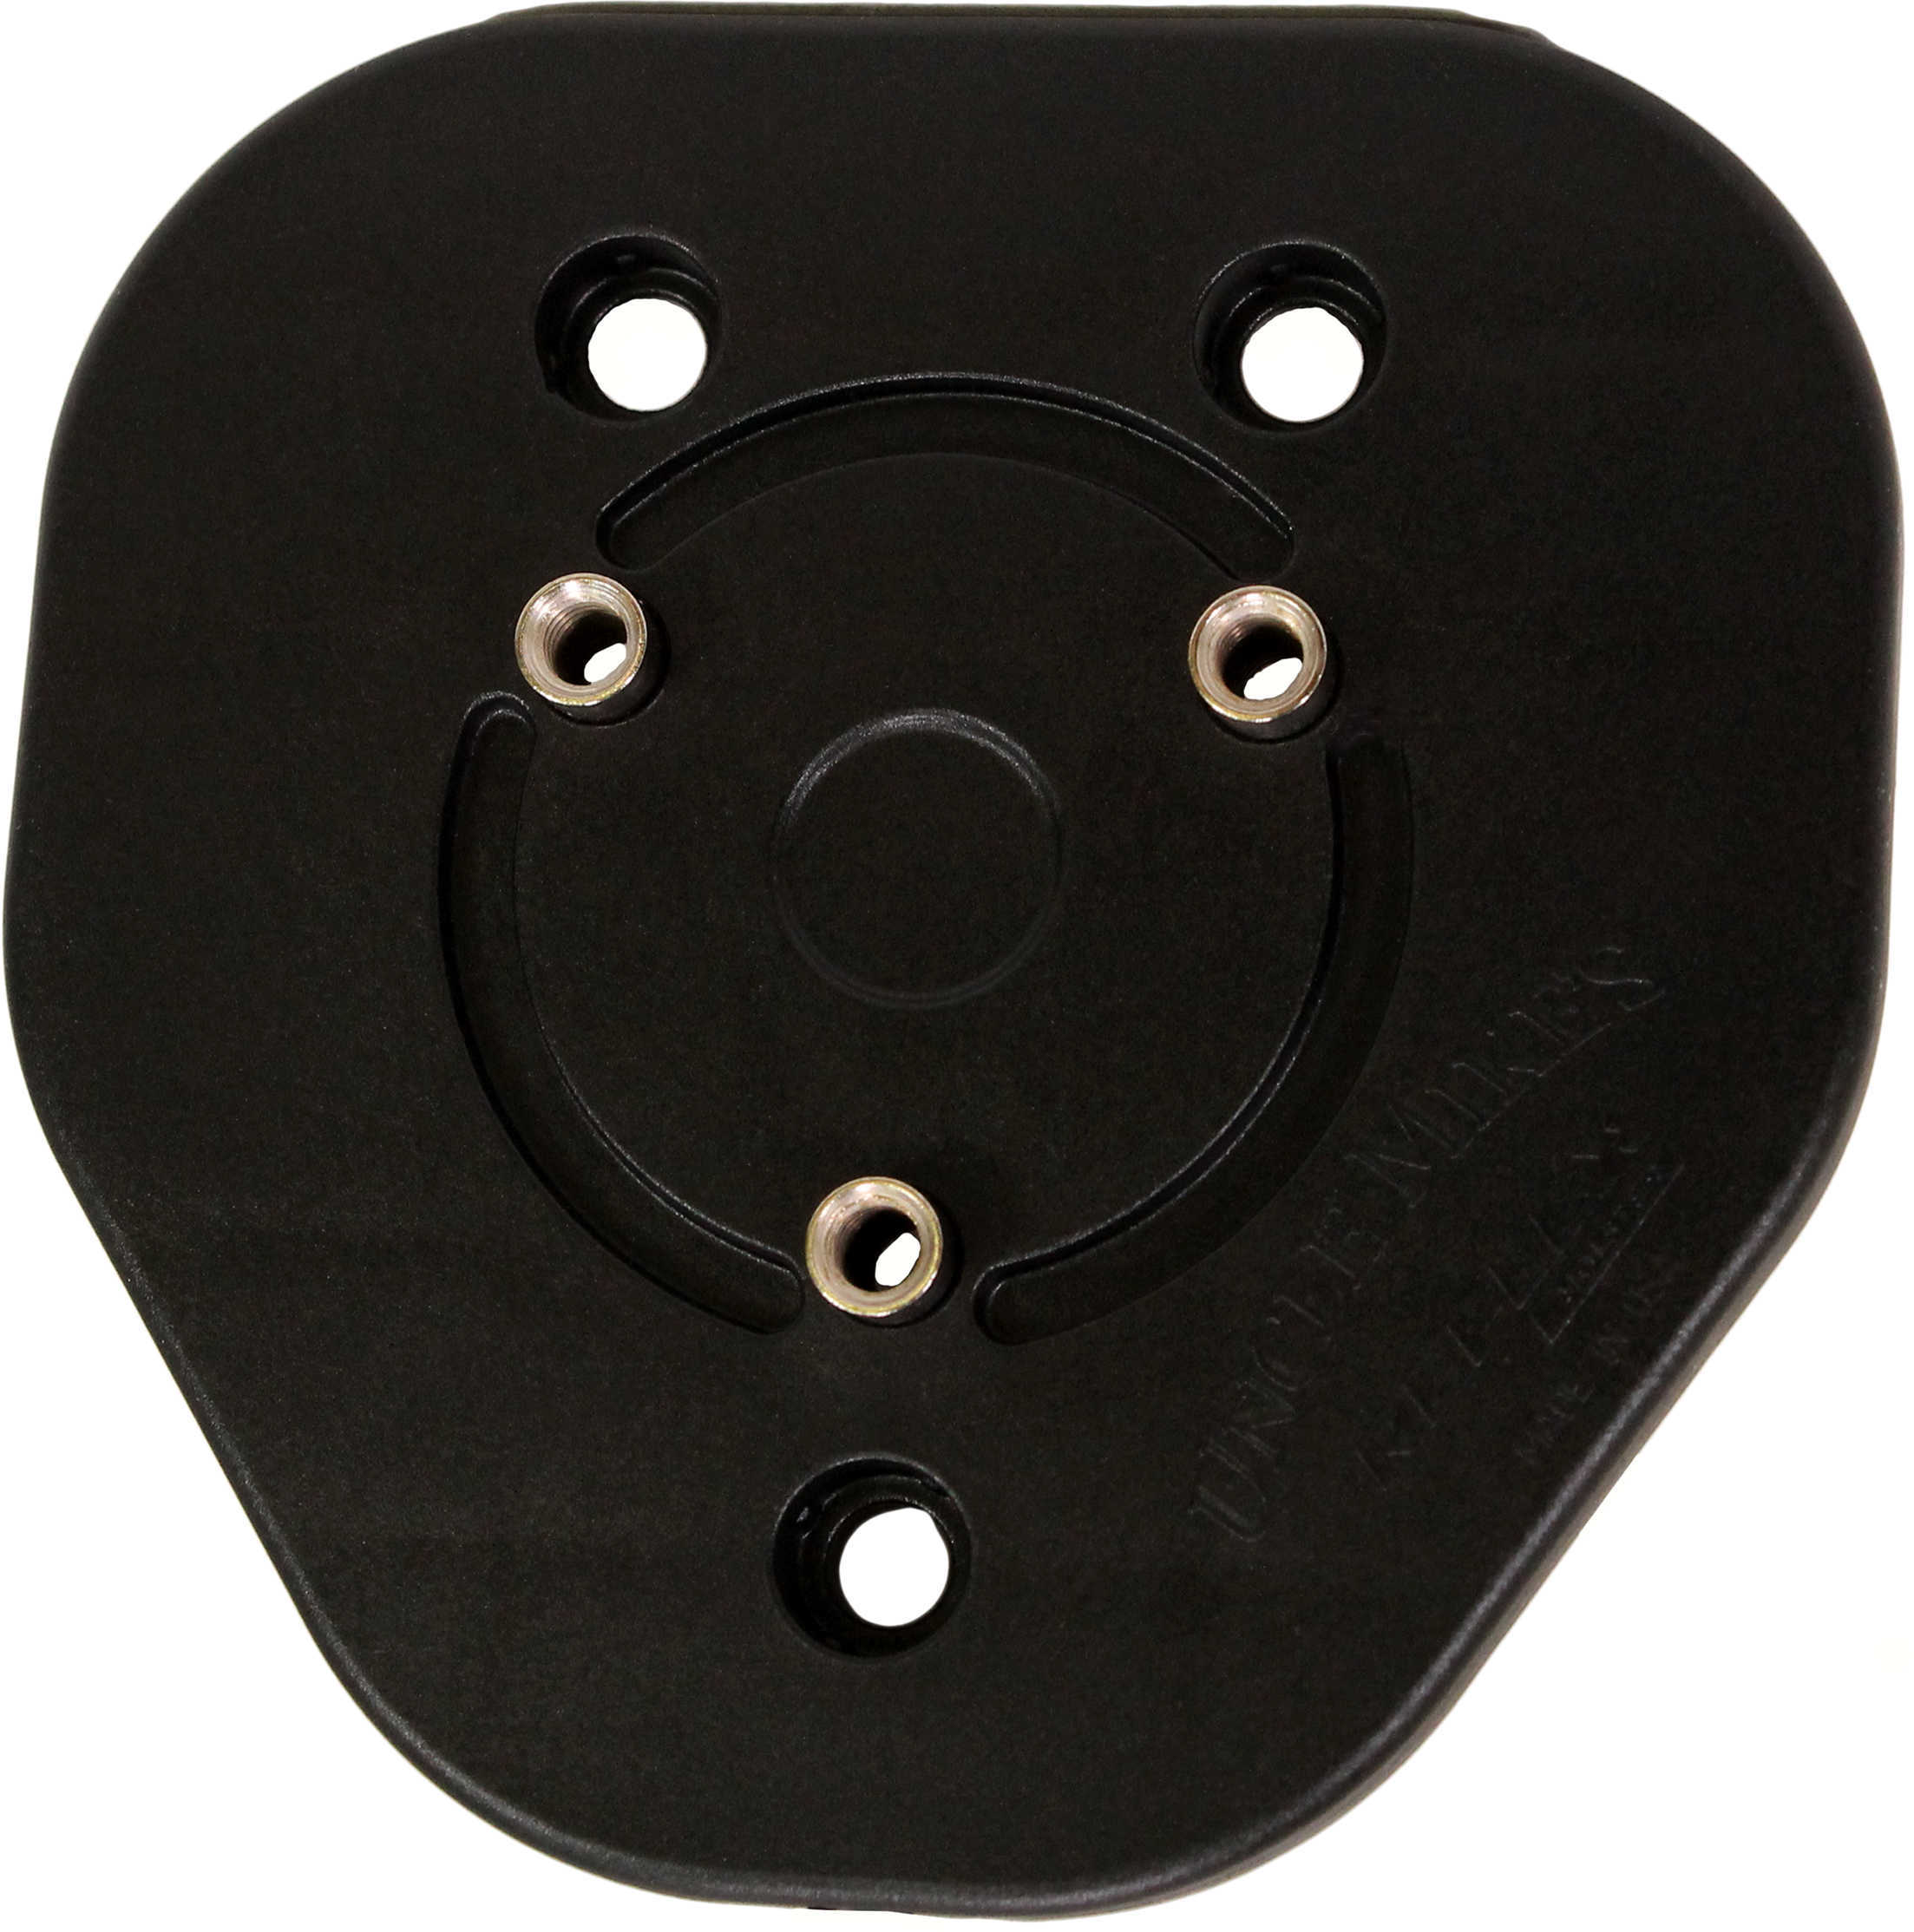 Uncle Mikes Reflex Adapter Plate Black